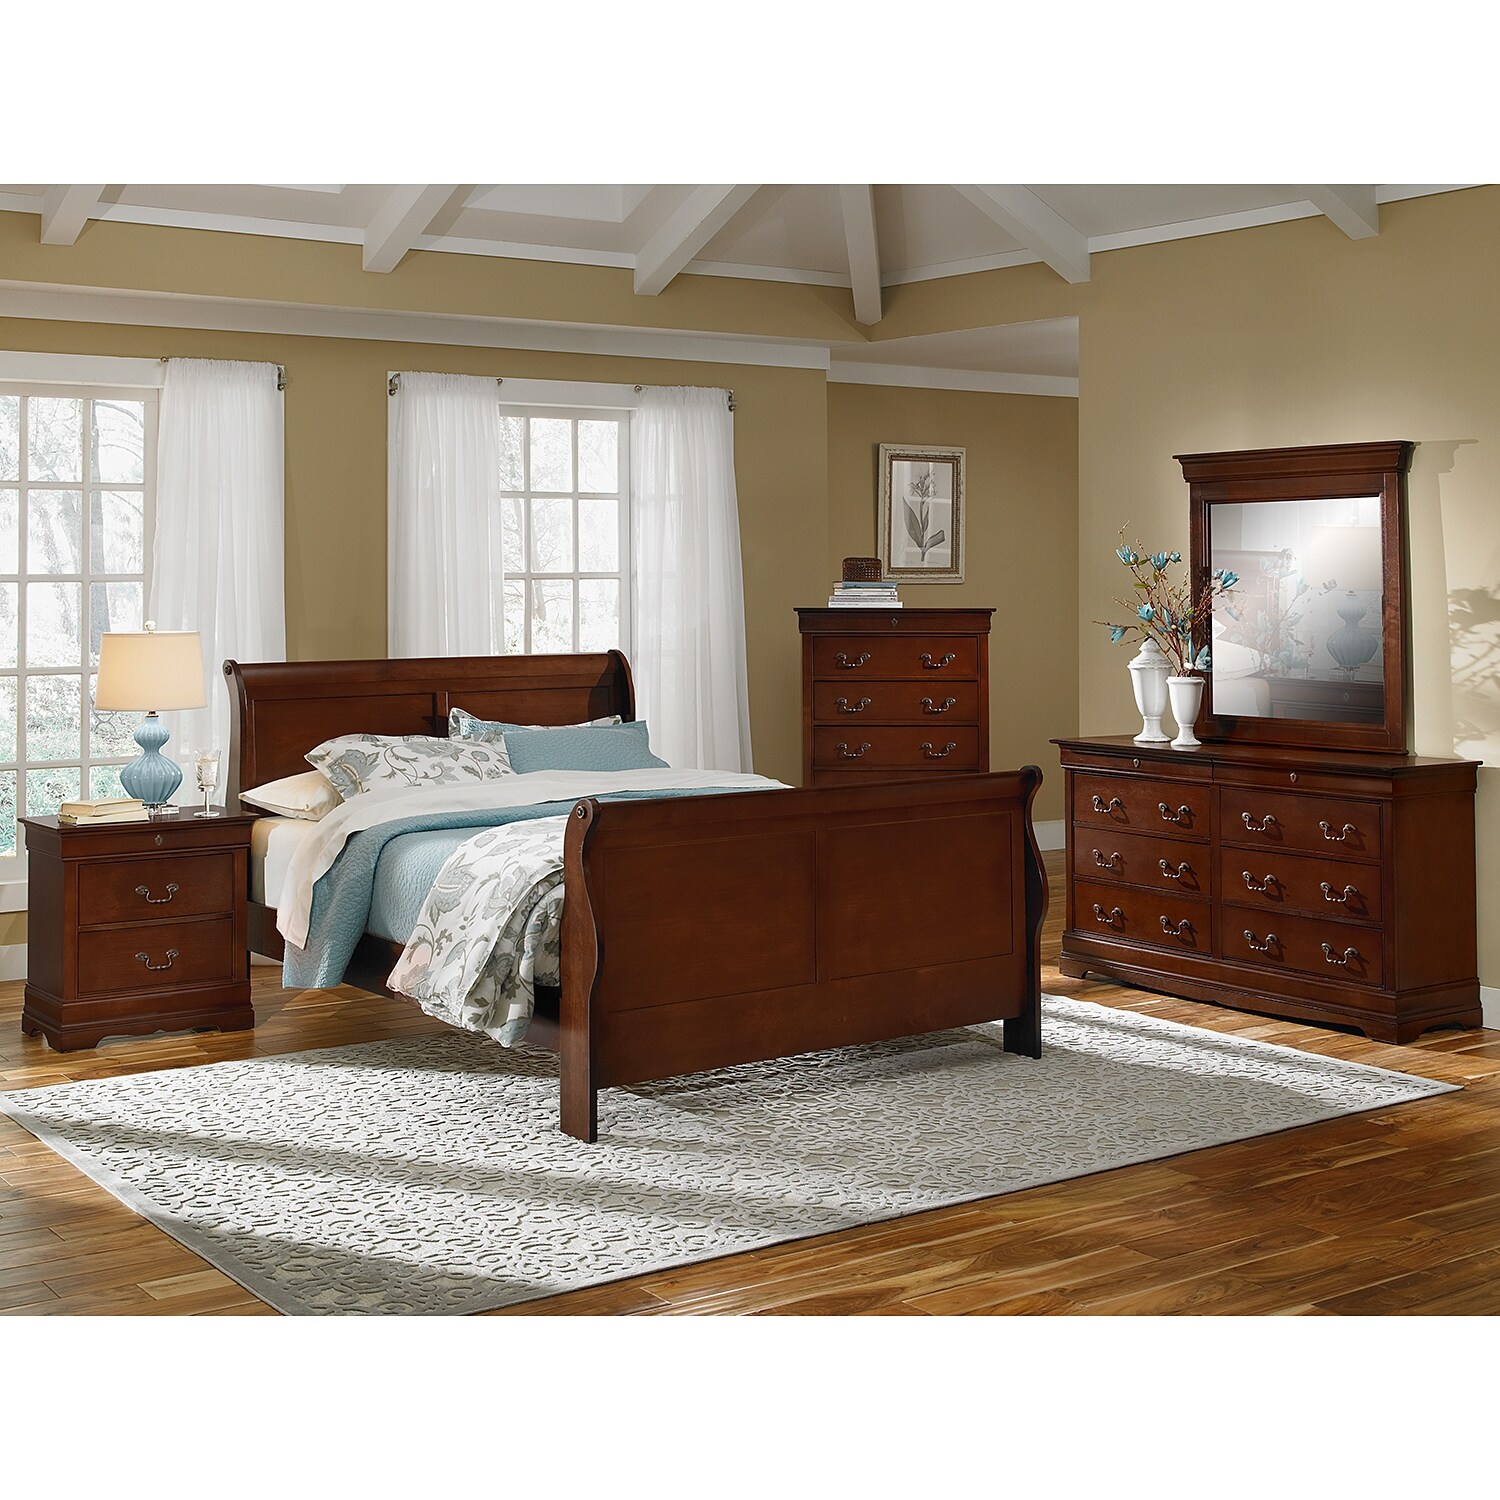 7 Piece Set Neo Style Bedroom Furniture Group 